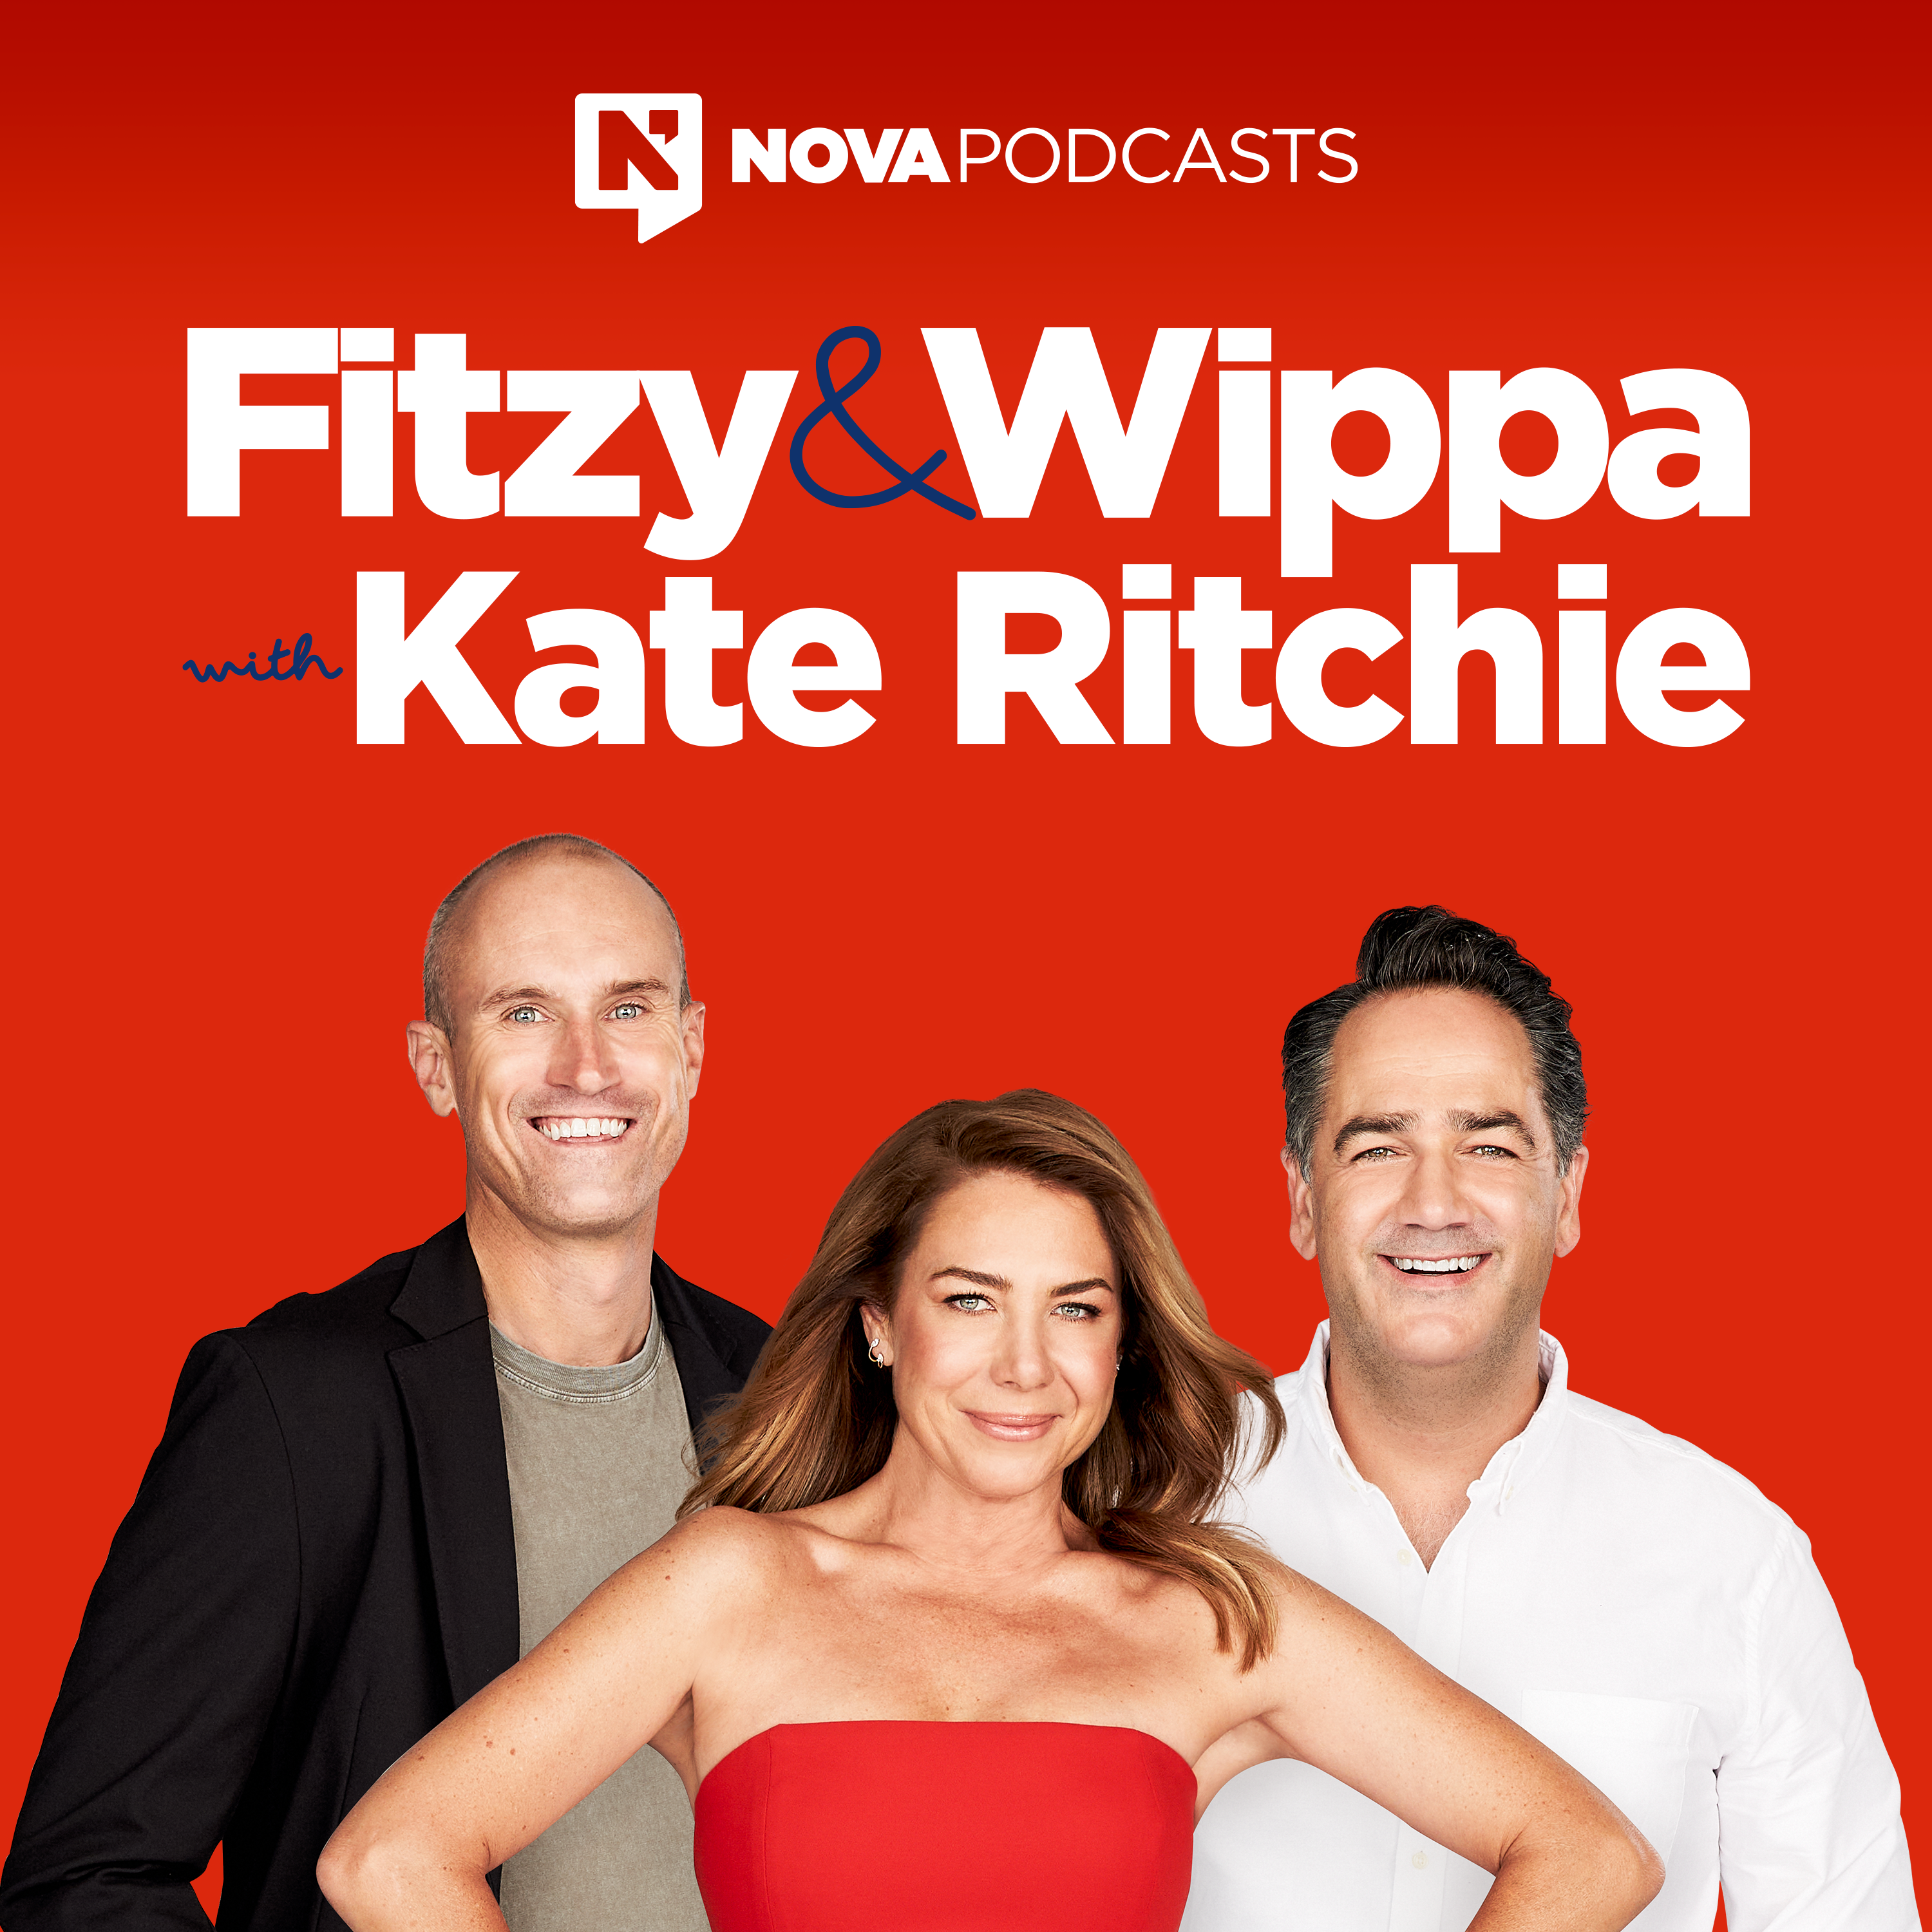 CATCH UP - Fitzy & Wippa's 2019 in review